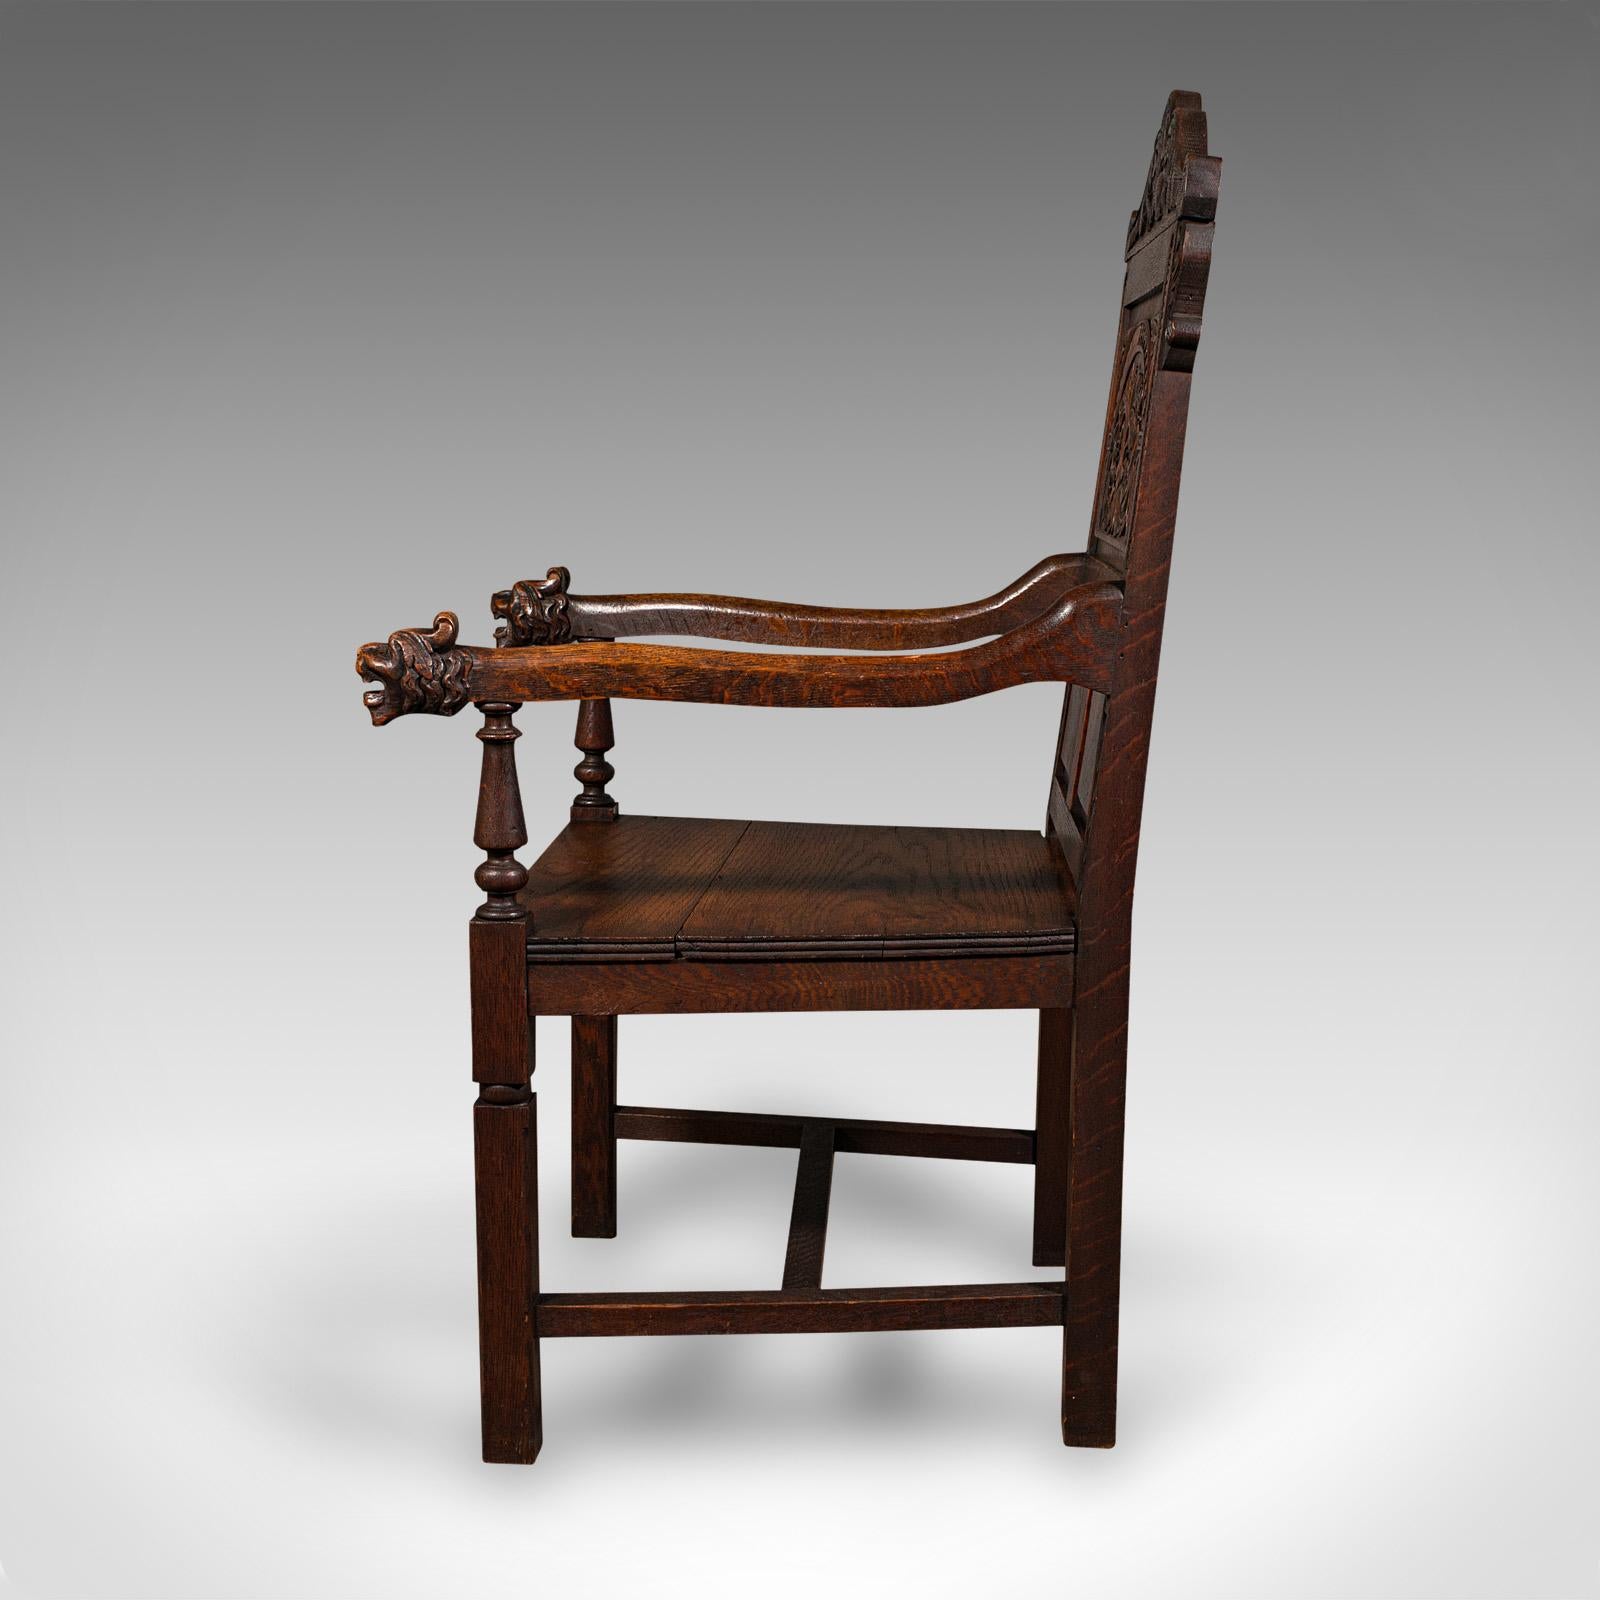 19th Century Antique Carved Hall Chair, Scottish, Oak, Decorative Elbow Seat, Victorian, 1860